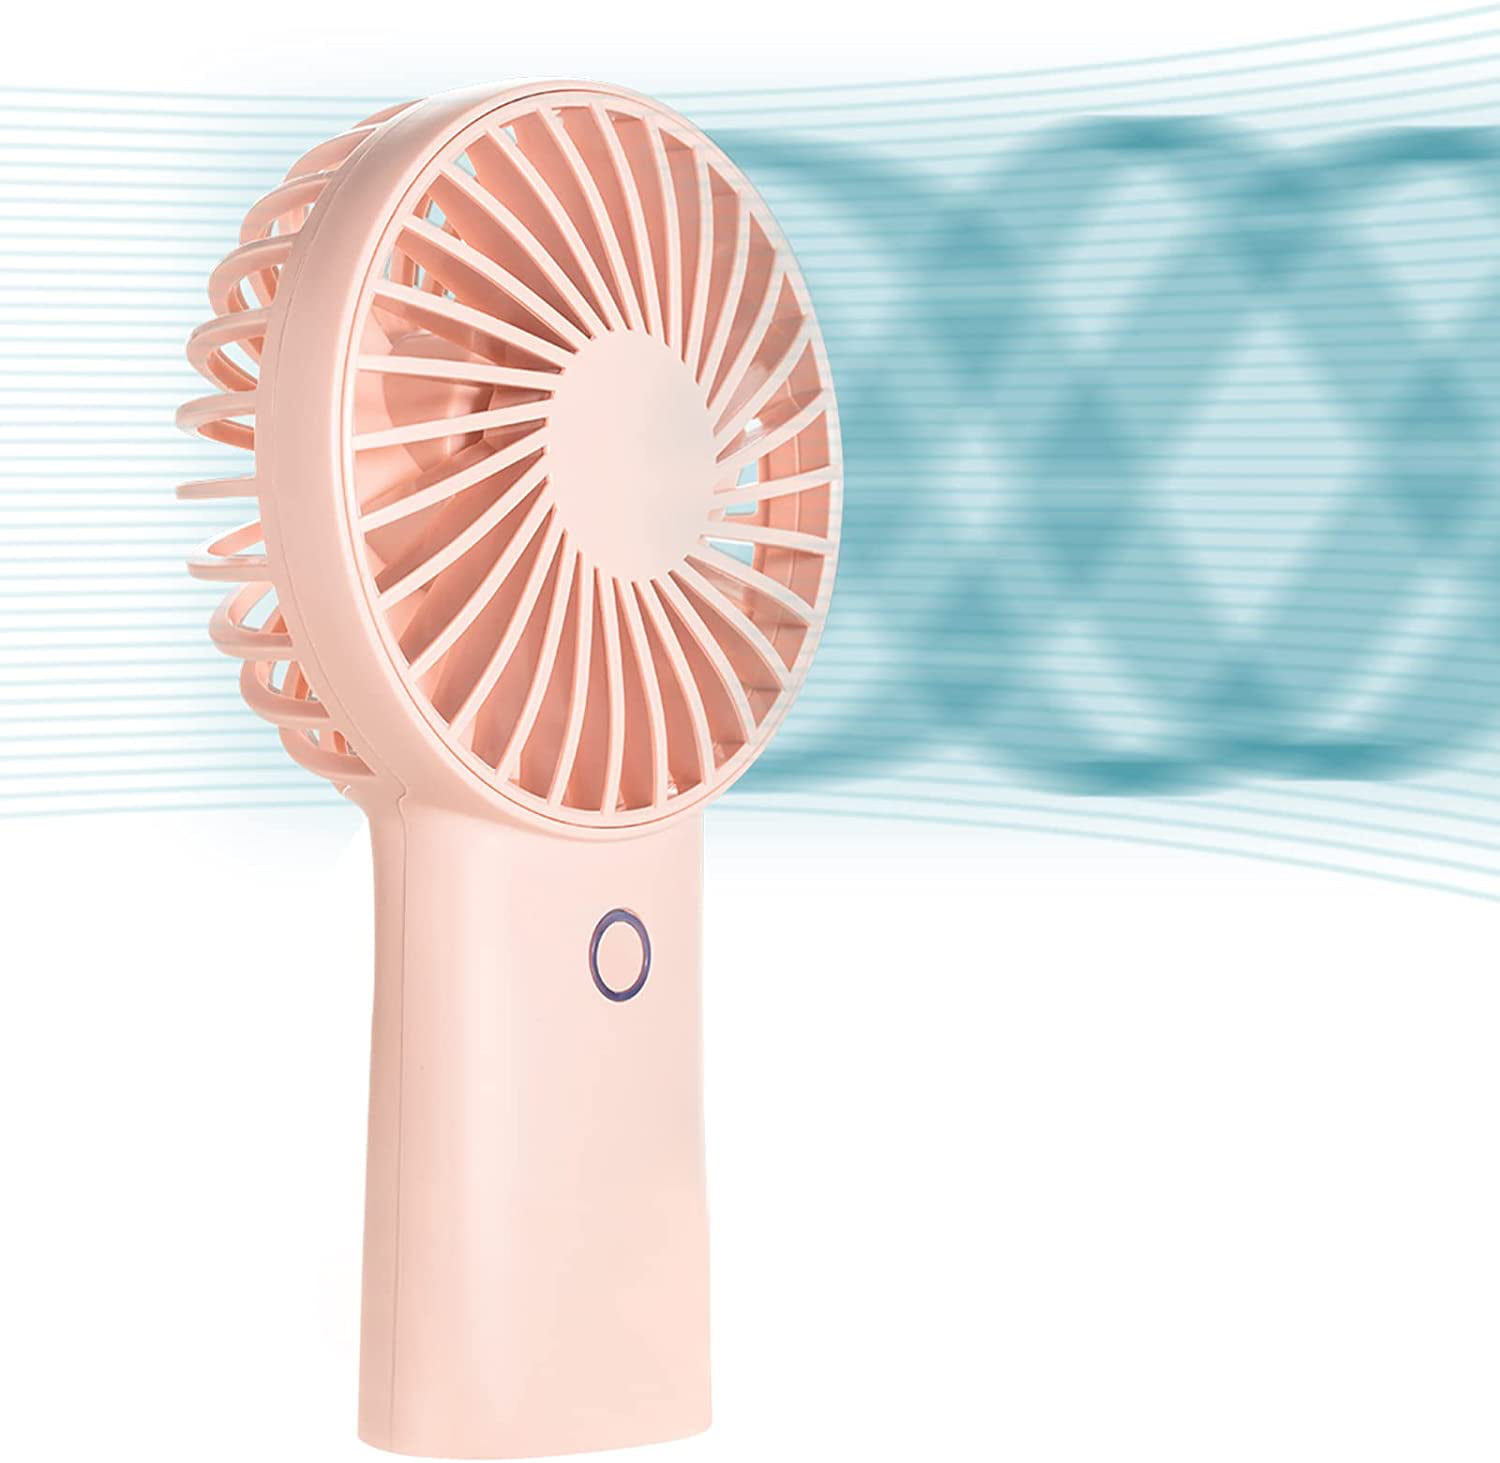 20H Max Cooling Time Mini Hand Fan 4000mAh USB Rechargeable Personal Fan Battery Operated Small Fan with 3 Speeds for Travel/Eyelash/Makeup/Office-Blue JISULIFE Handheld Portable Fan 